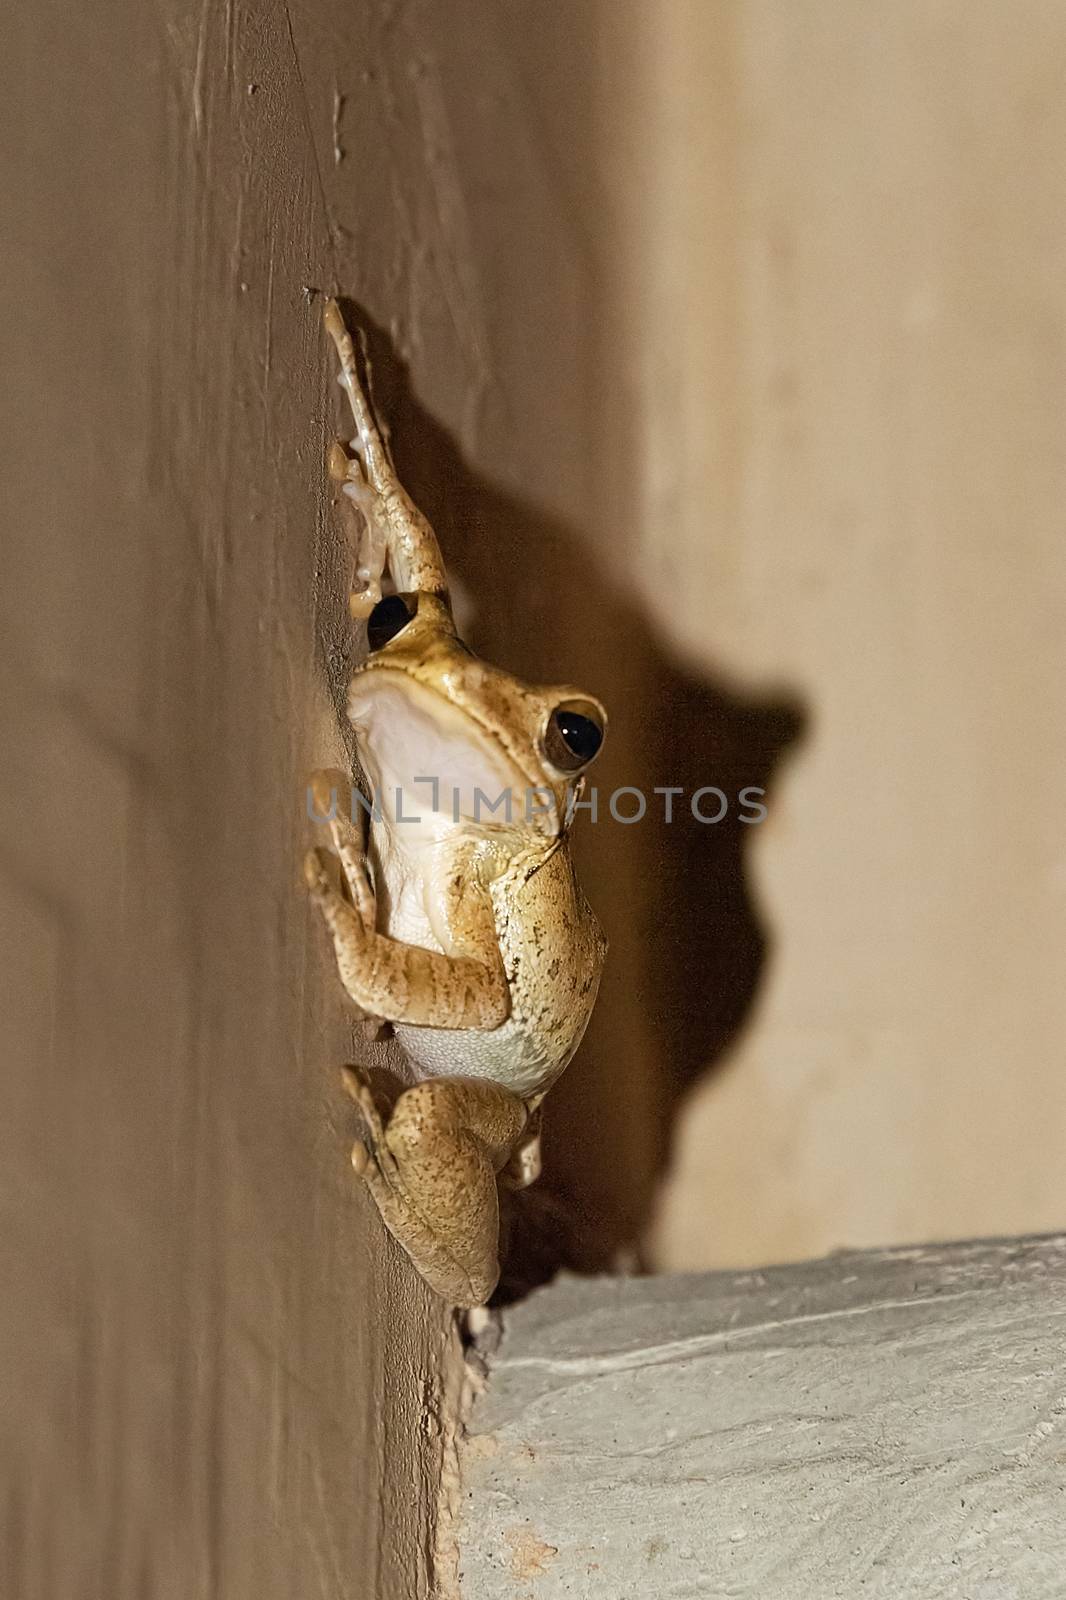 Sri lanka, Sept 2015:  Polypedates cruciger, whipping frog sticks to a wall